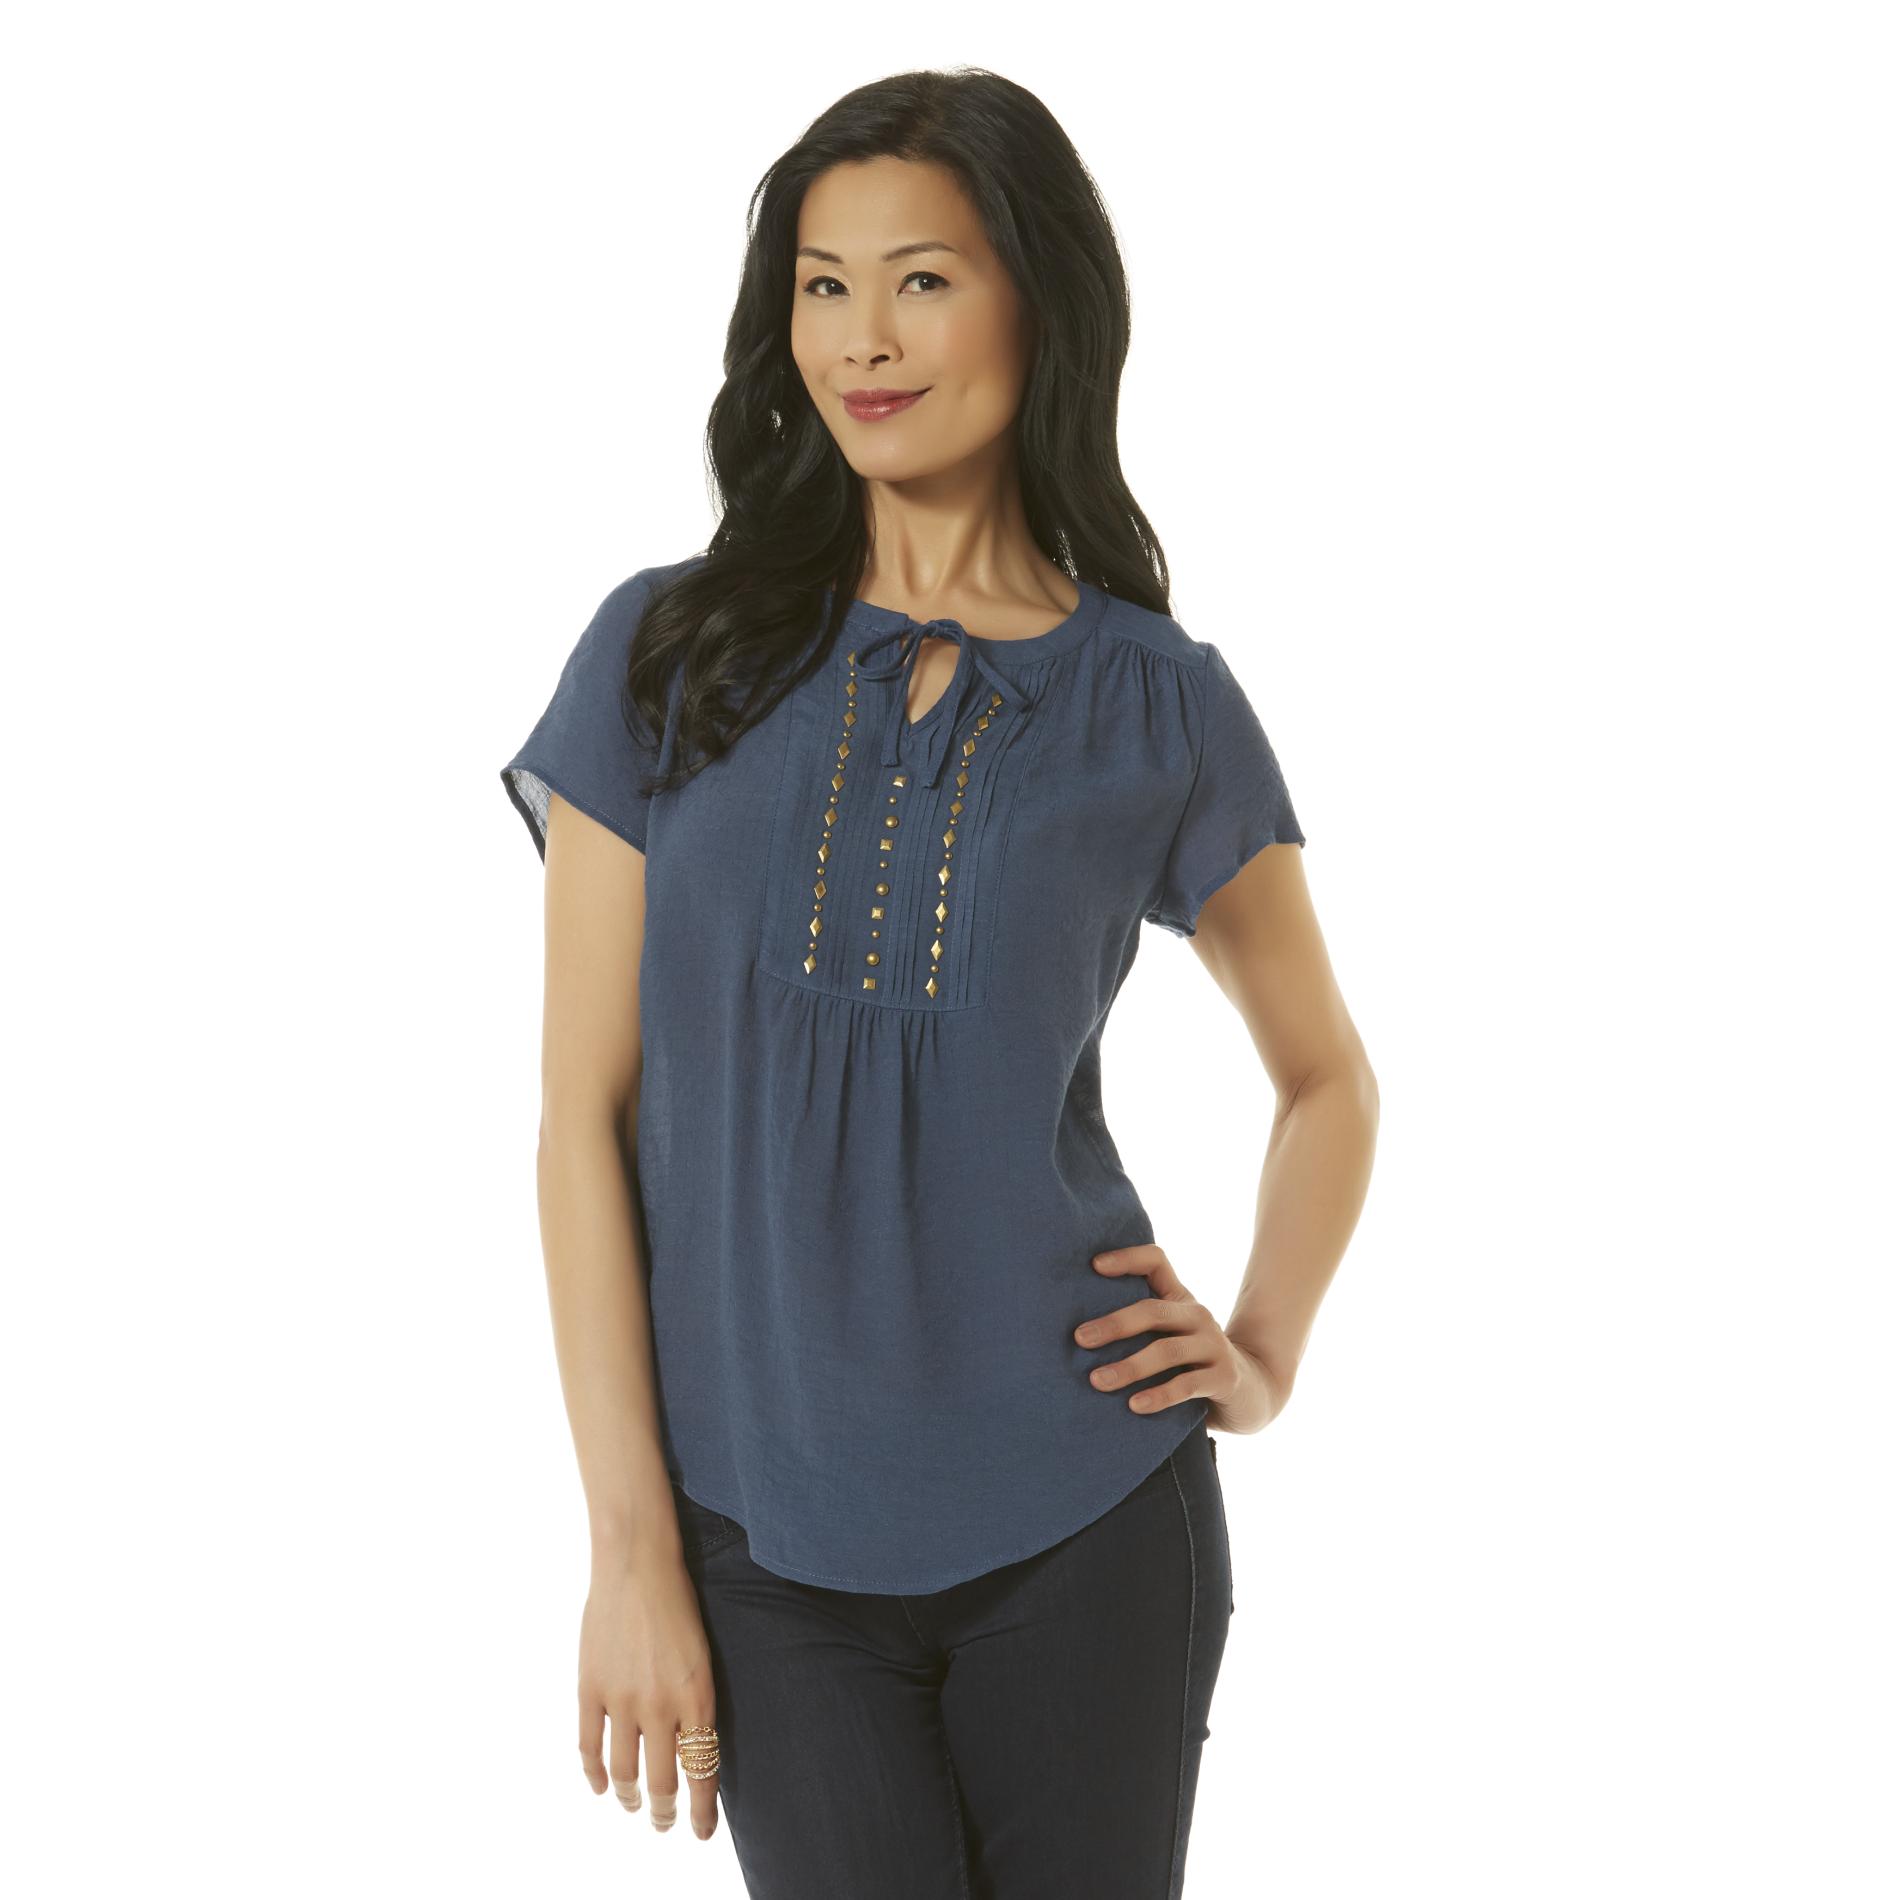 Women's Embellished Peasant Top